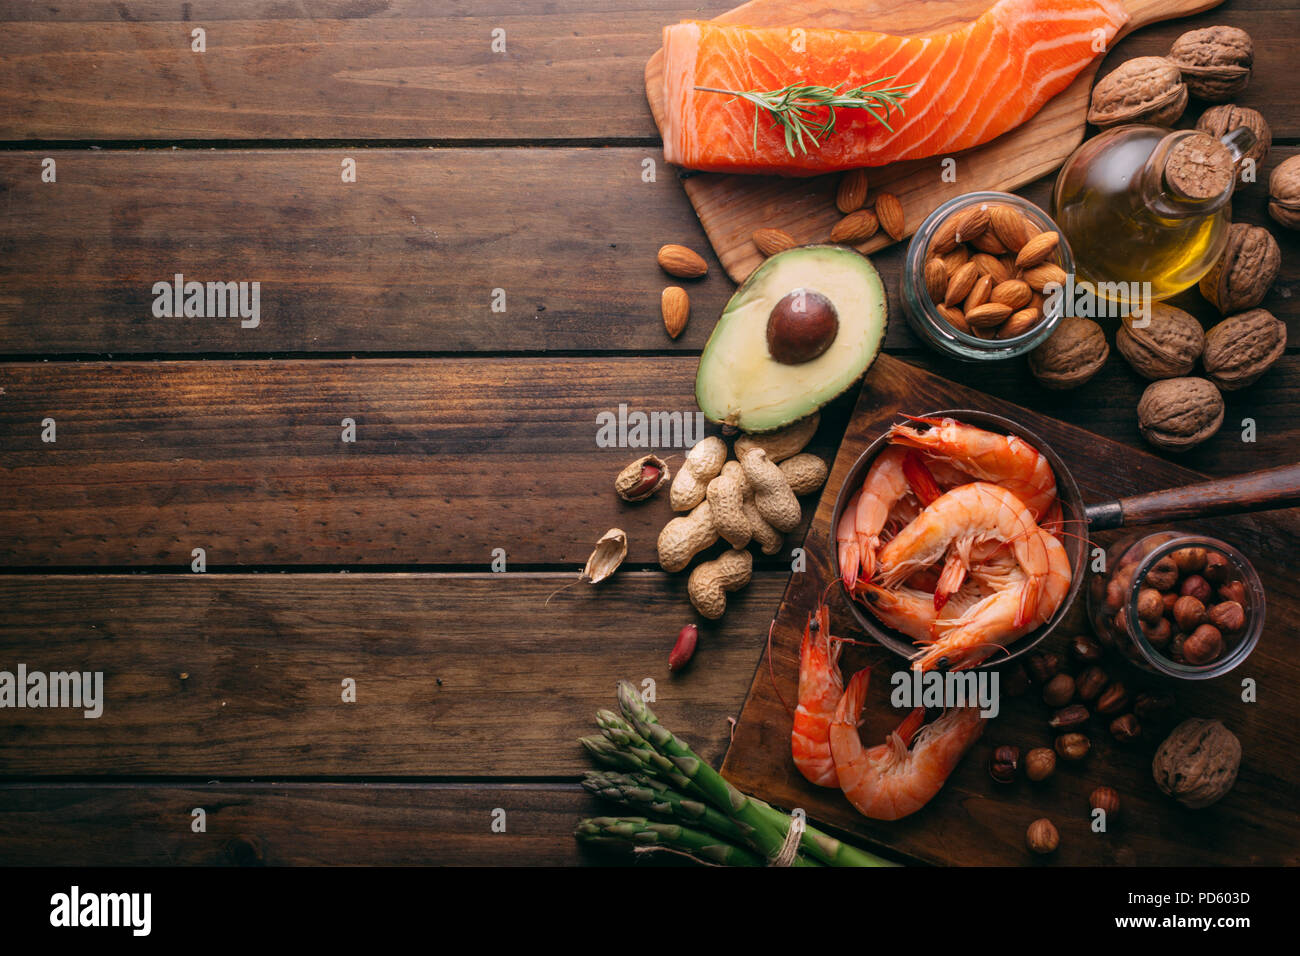 Top view of Large group of food and good fats Stock Photo